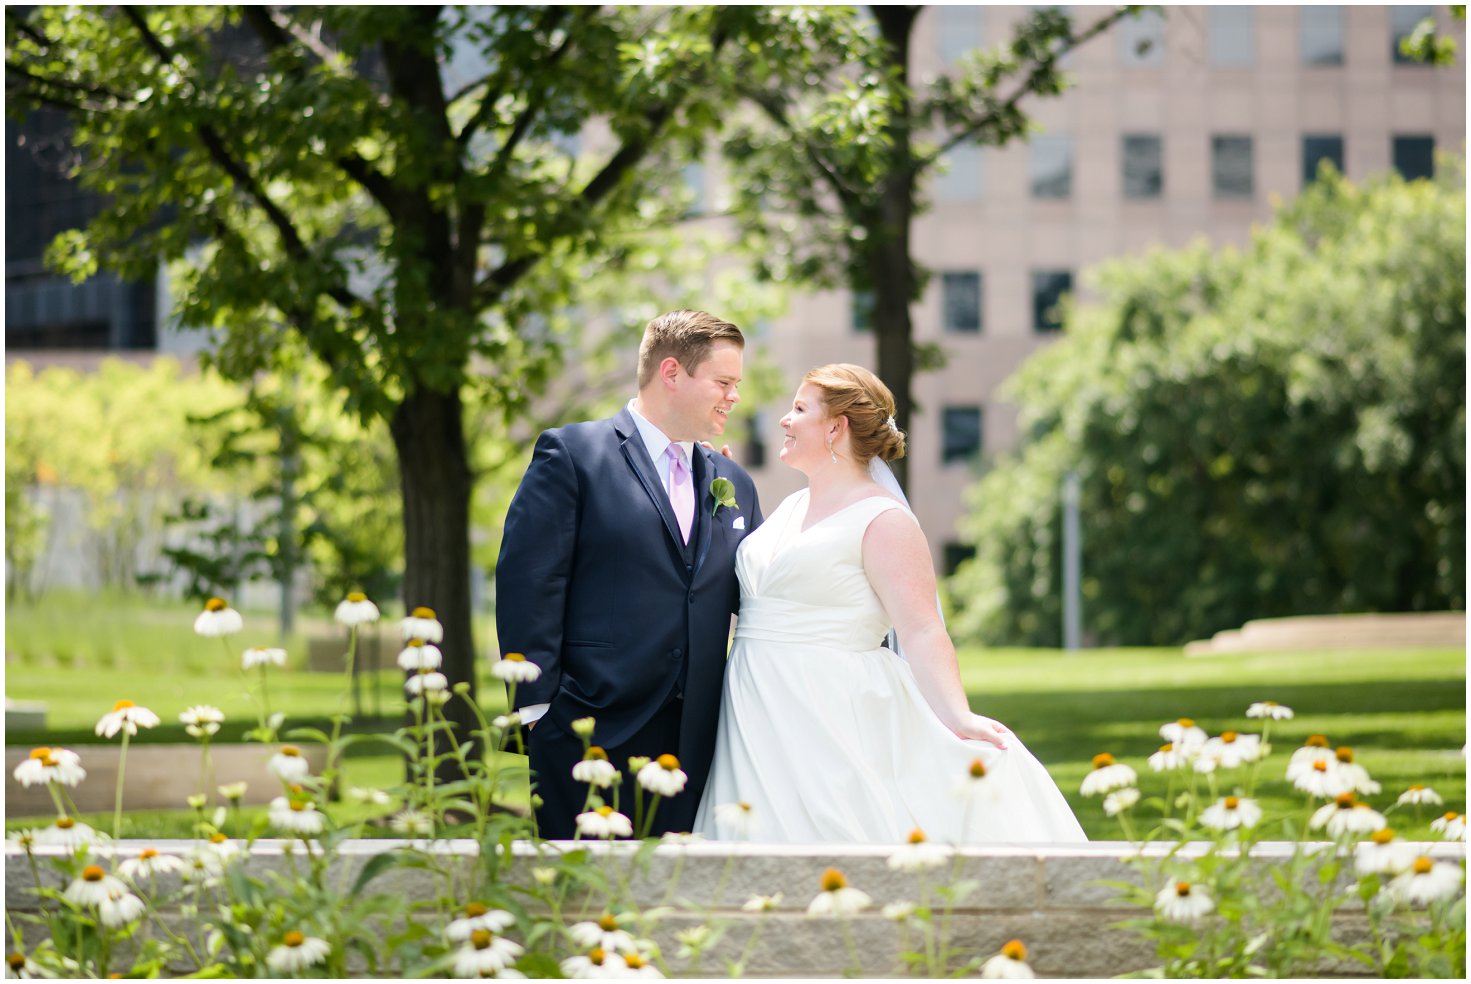 Des Moines Embassy Club Wedding | Annaberry Images